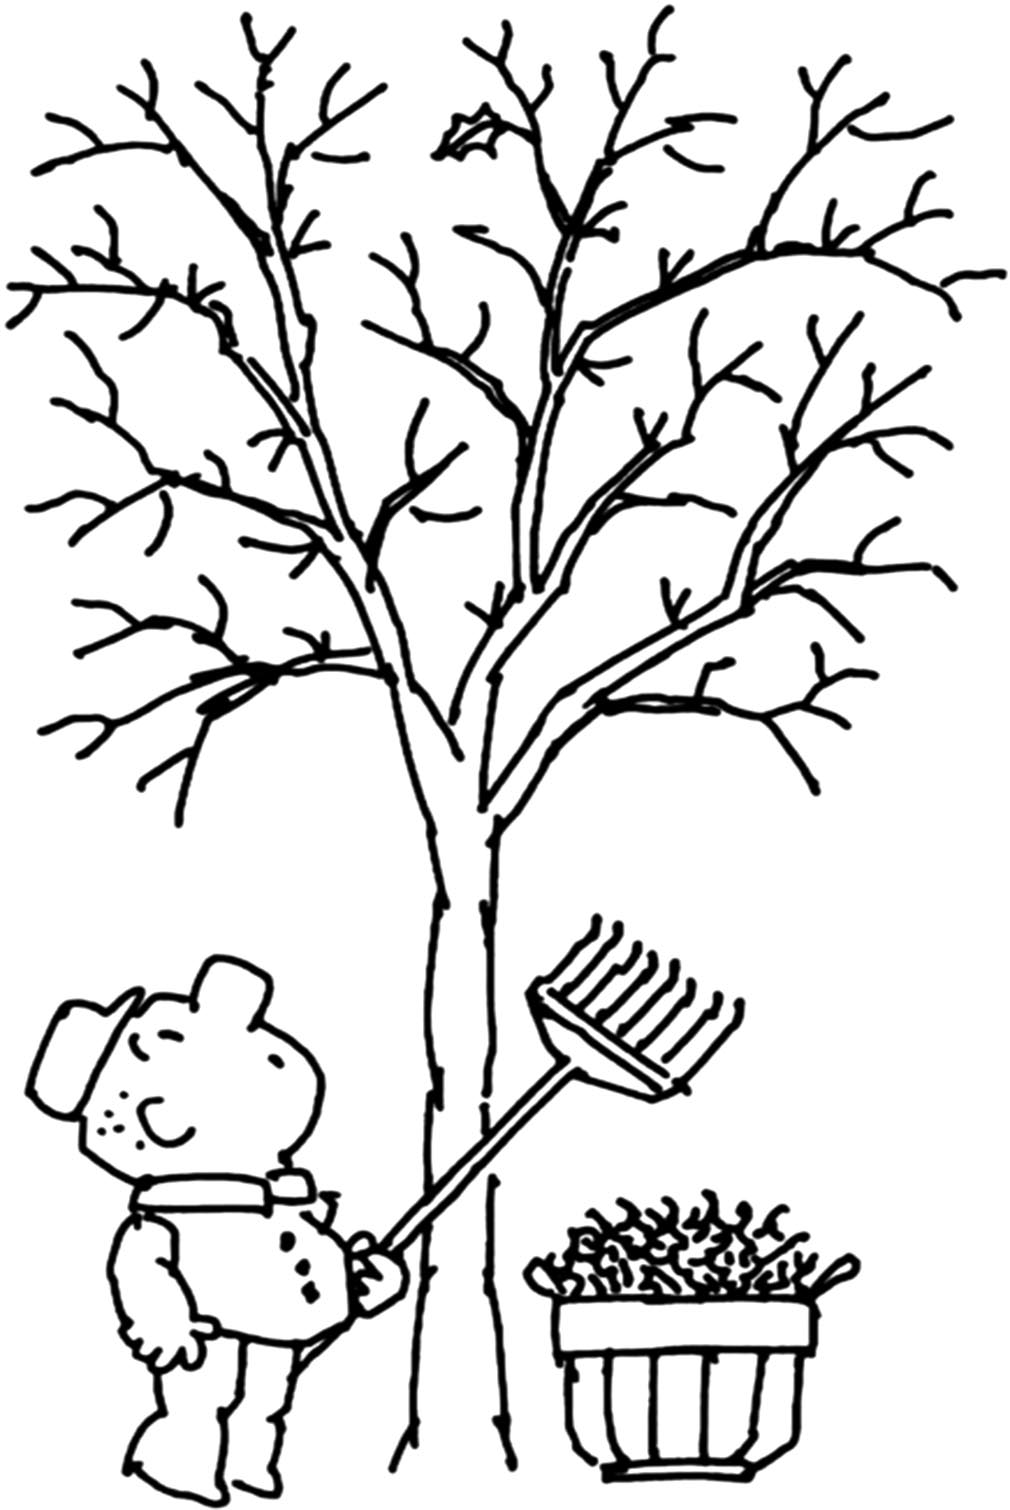 A man Is Raking Leaves Coloring Page